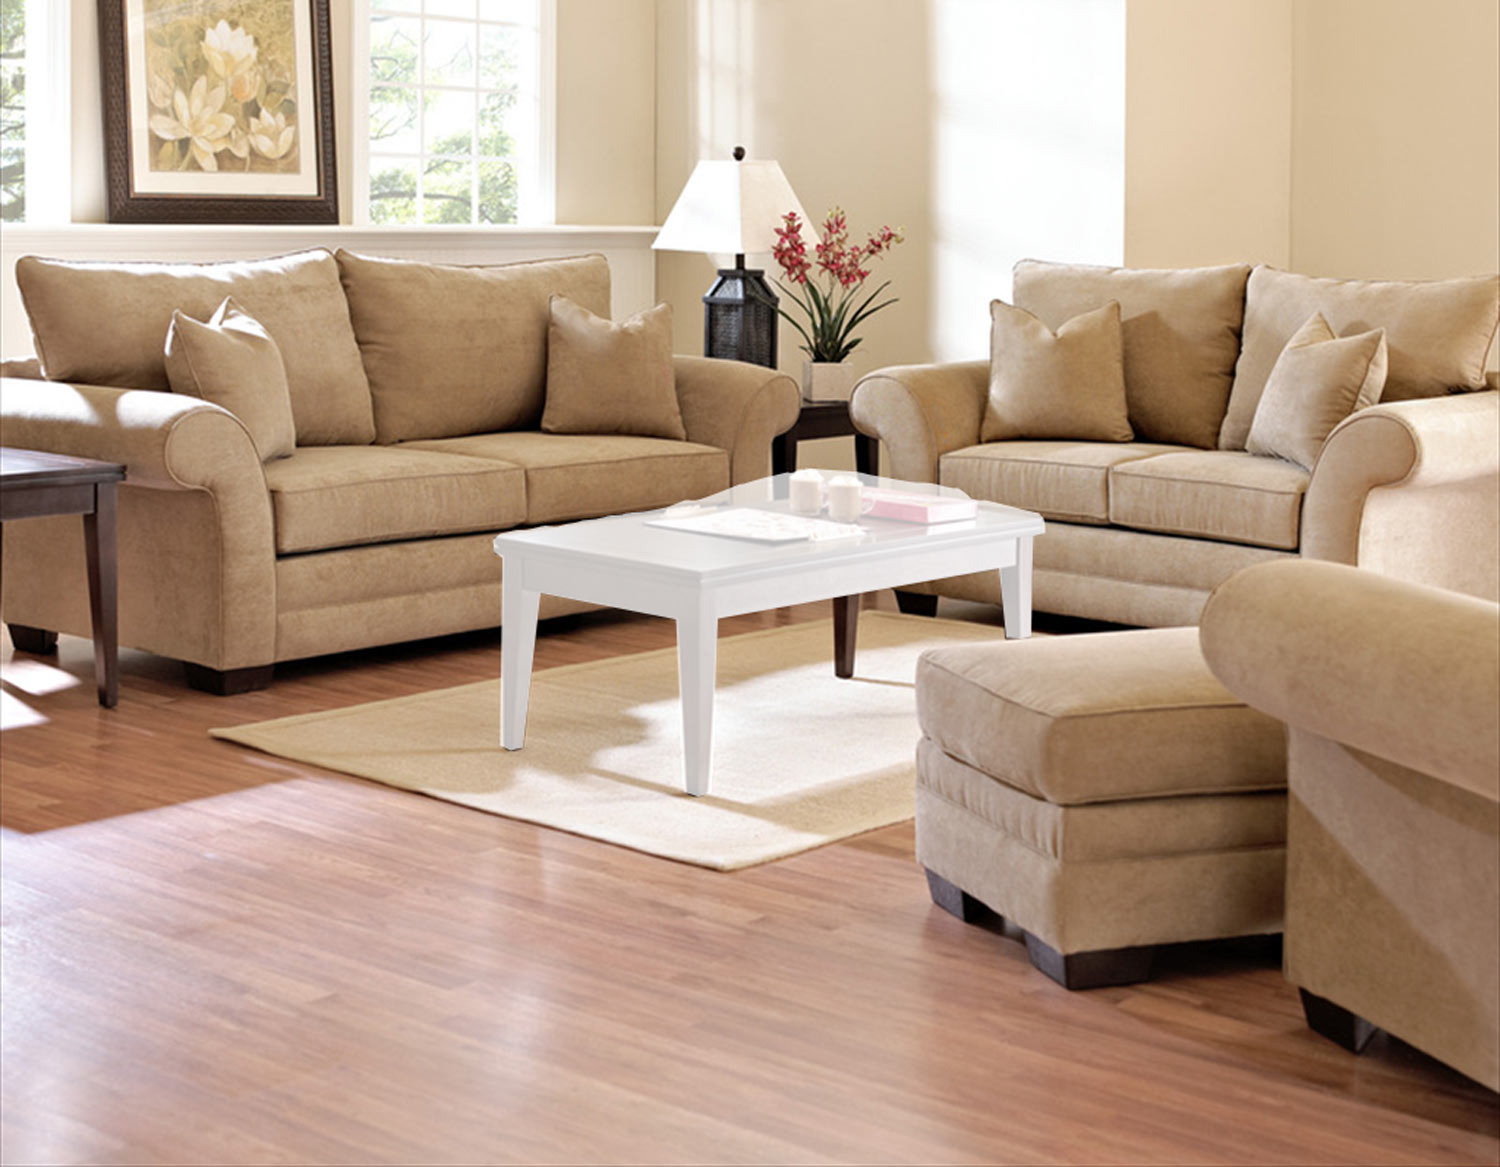 Klaussner Holly Sofa Set - Willow Bronze